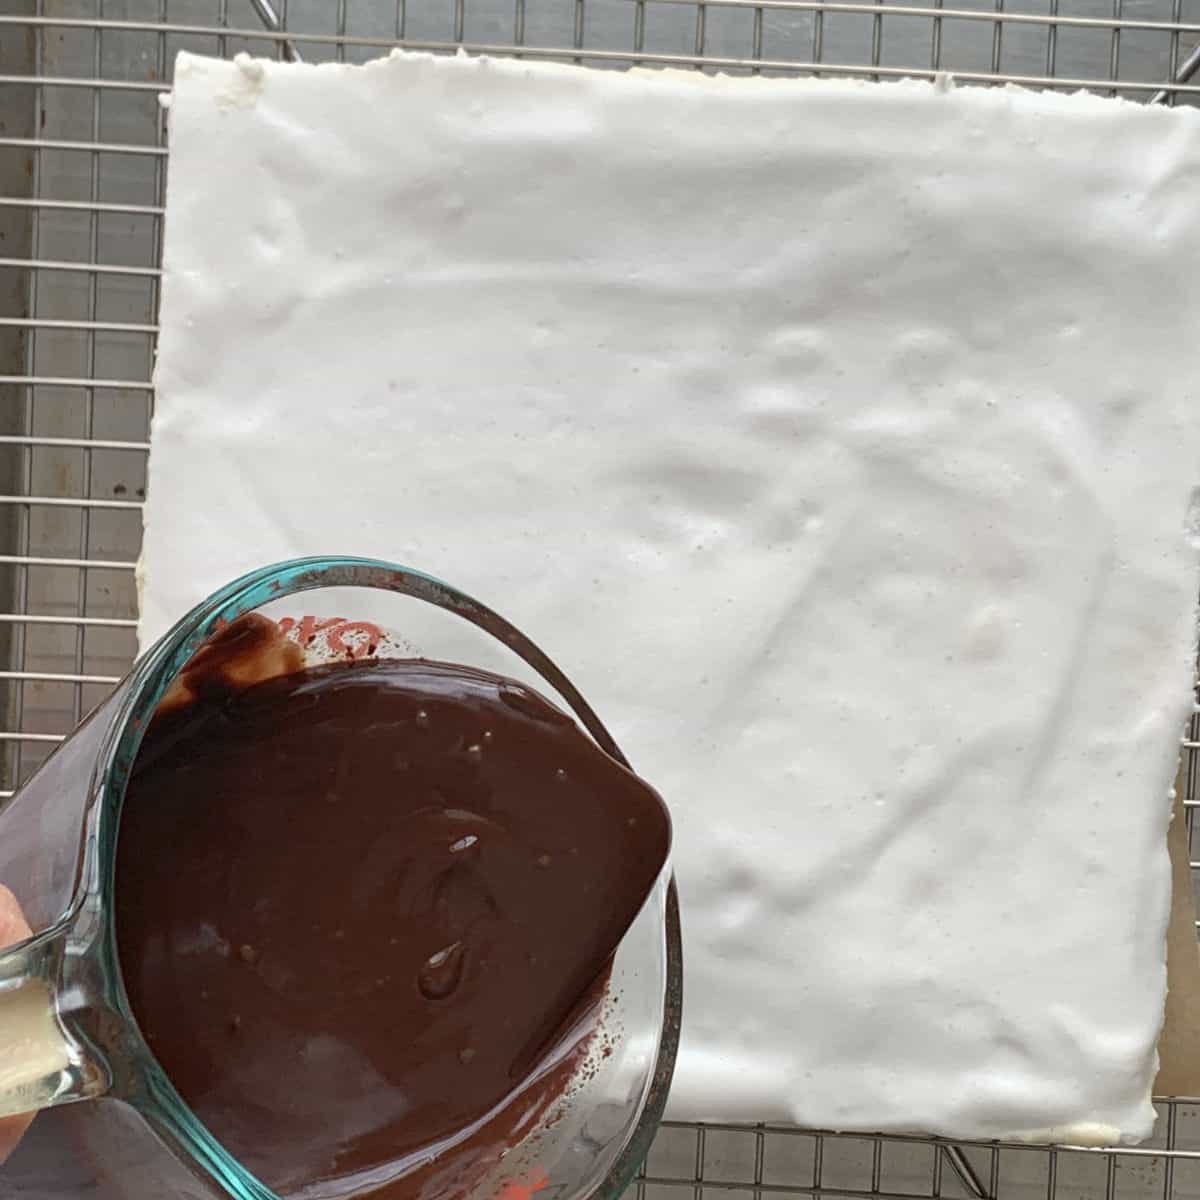 Assembling the cake by adding the glaze.